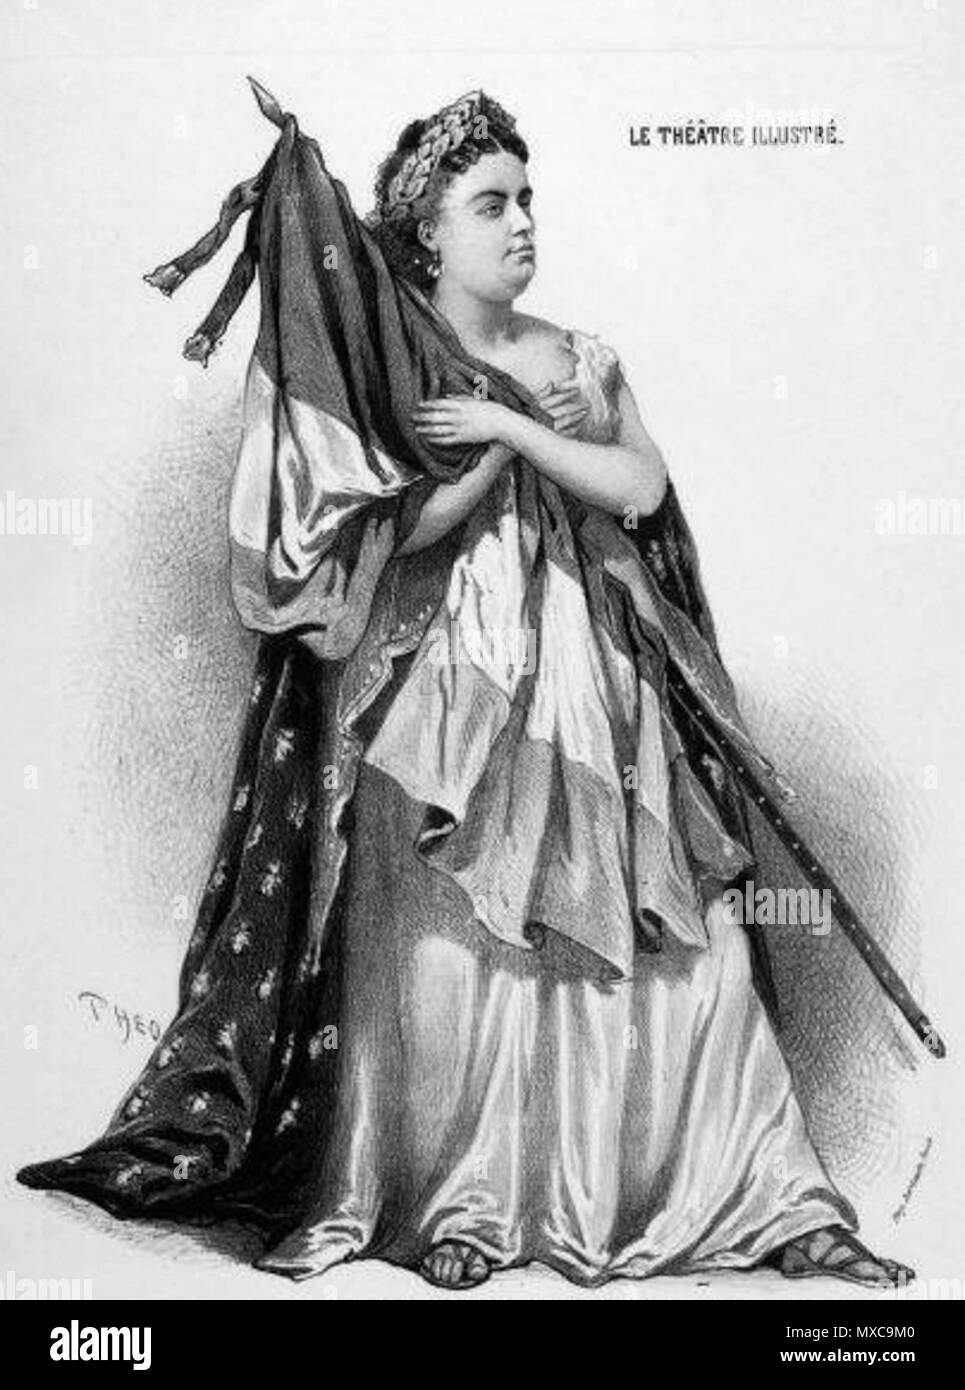 . English: Belgian soprano Marie Sasse (1834-1907) singing La Marseillaise at the Théâtre impérial de l'Opéra in Paris. Illustration by Théo (18? - 18?) from Le Théâtre illustré (1869). 1869. Théo 399 Marie Sasse chantant la Marseillaise 1869 Stock Photo